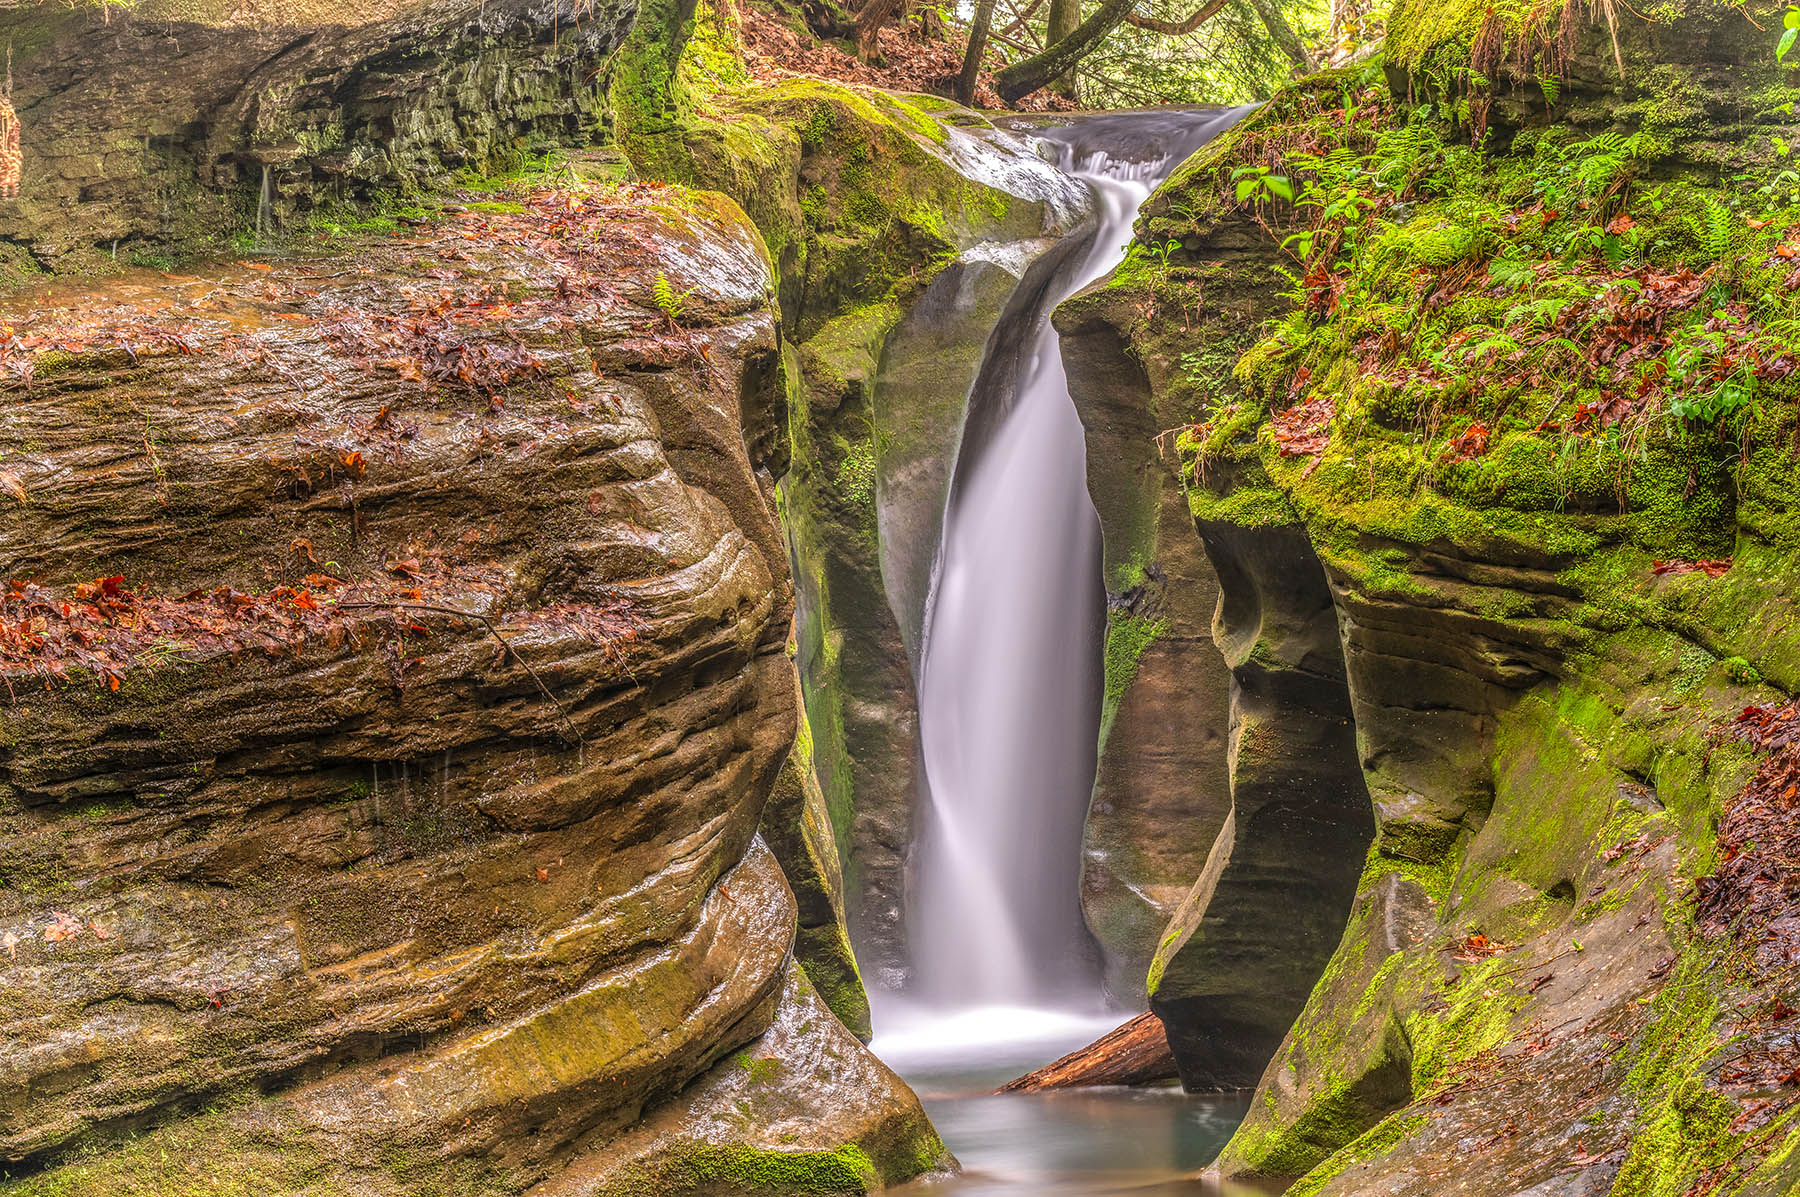 Top Photography Spots in Hocking Hills: Capturing Nature’s Masterpieces